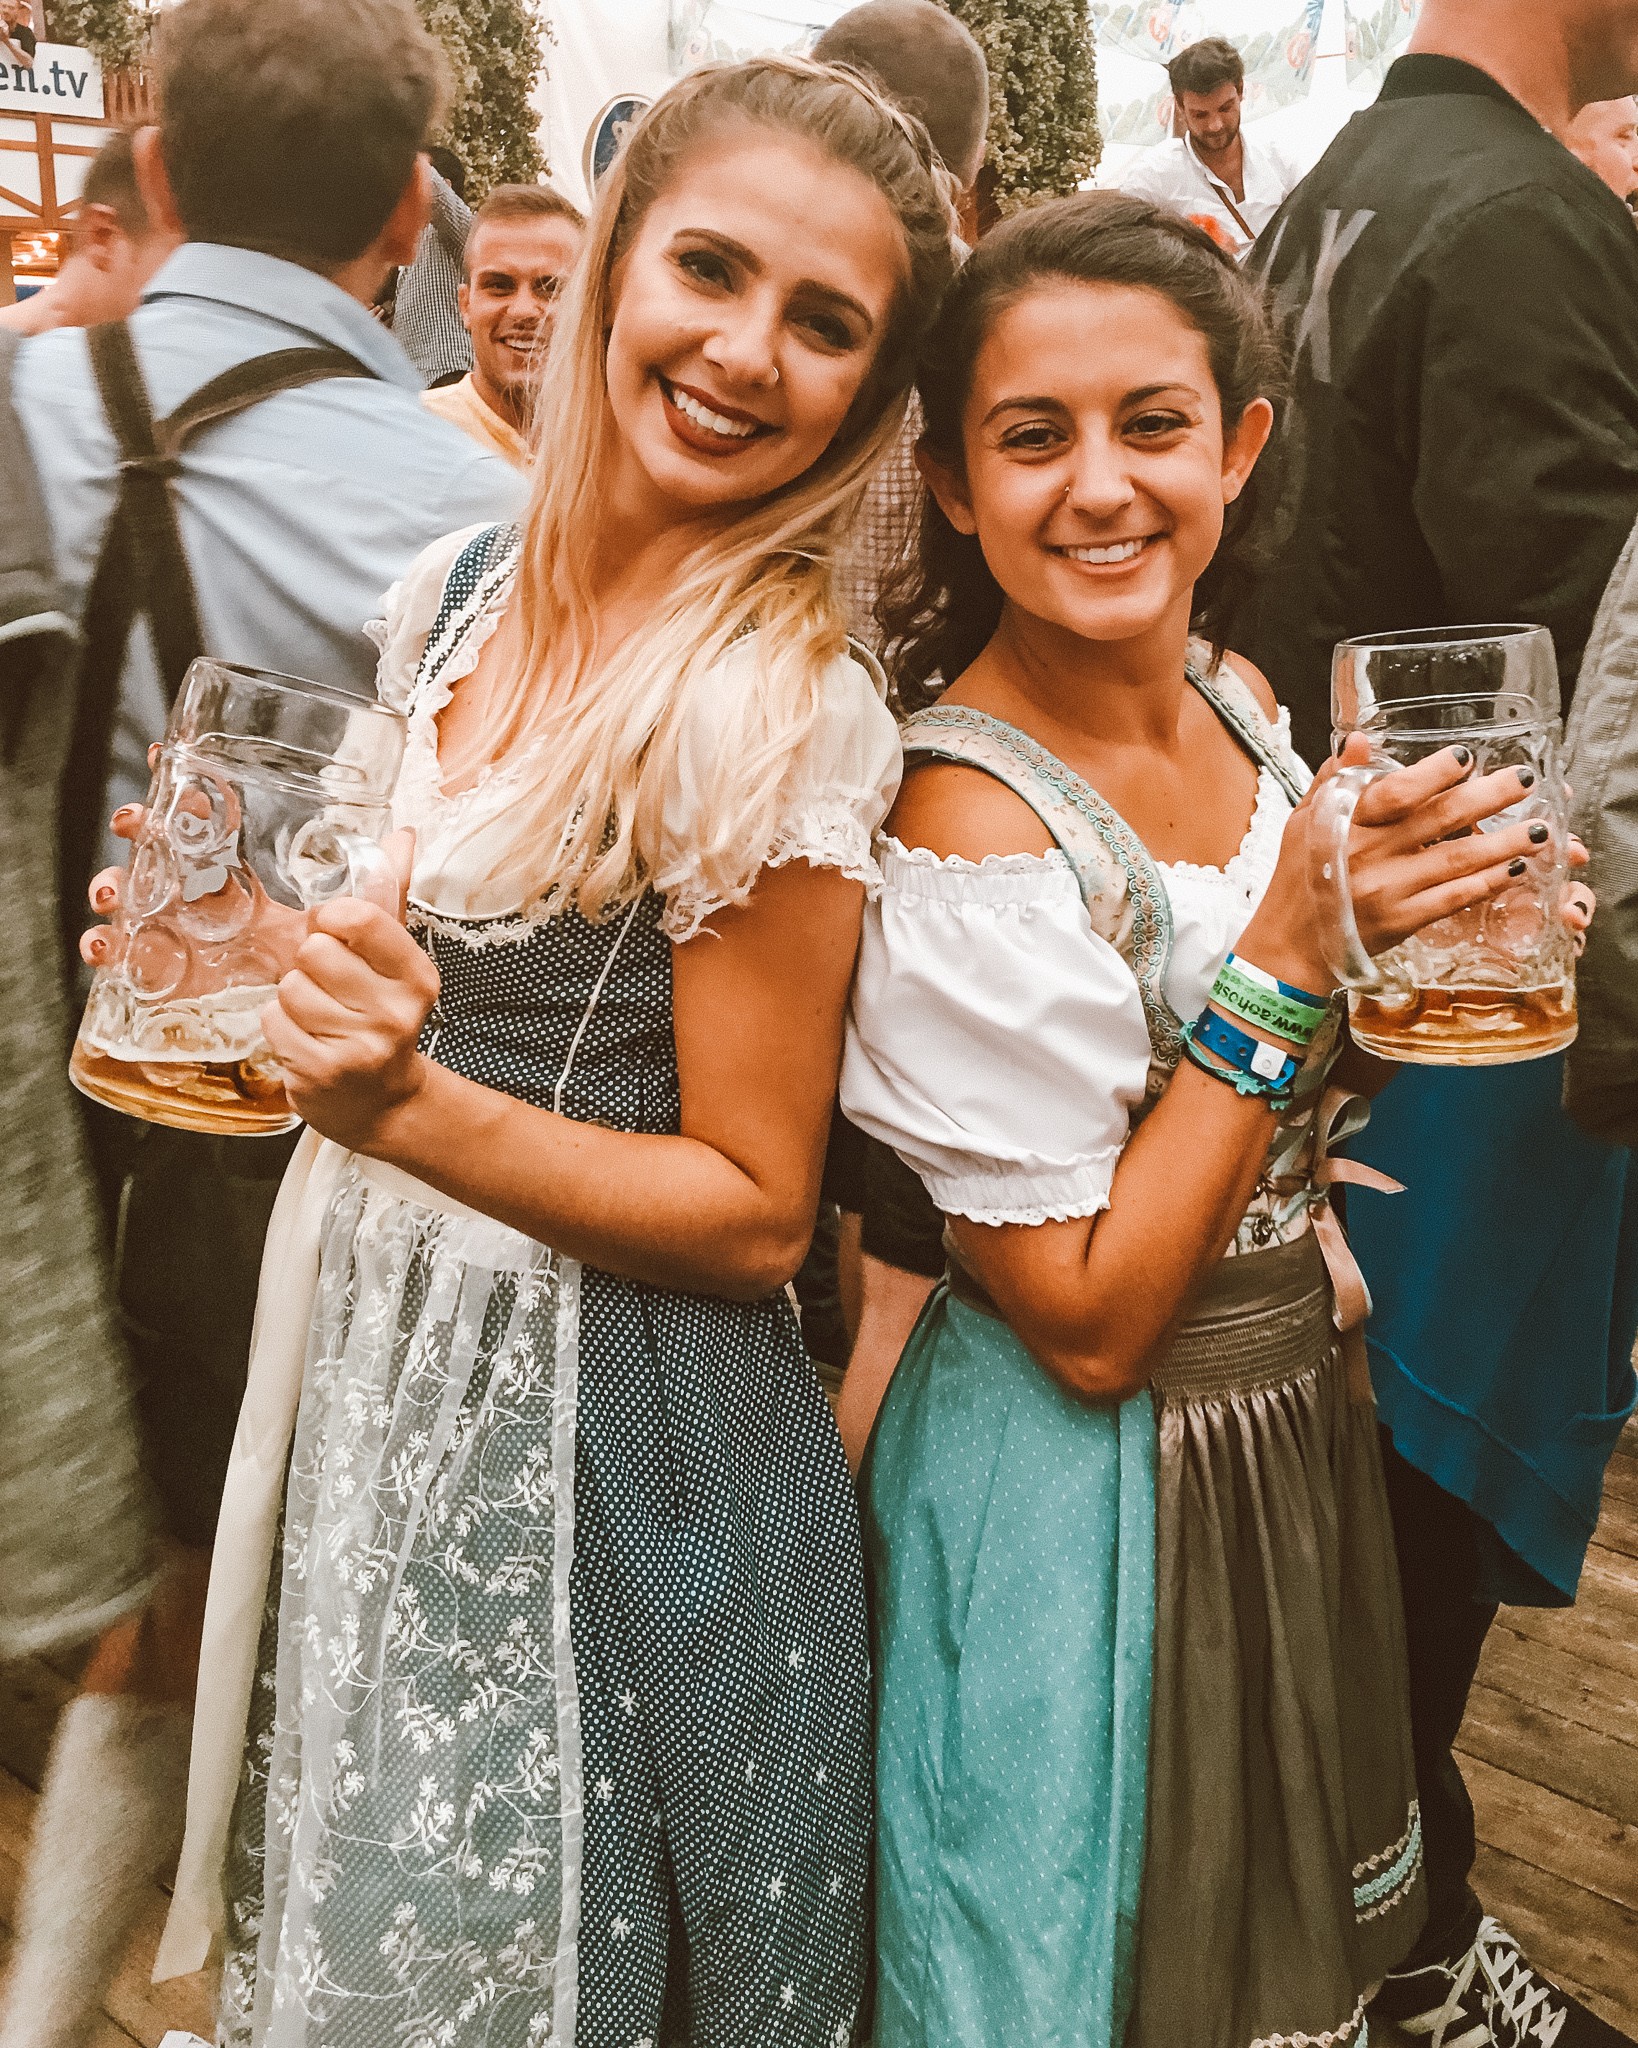 What to Wear to Oktoberfest |Oktoberfest Packing Guide - The Boho